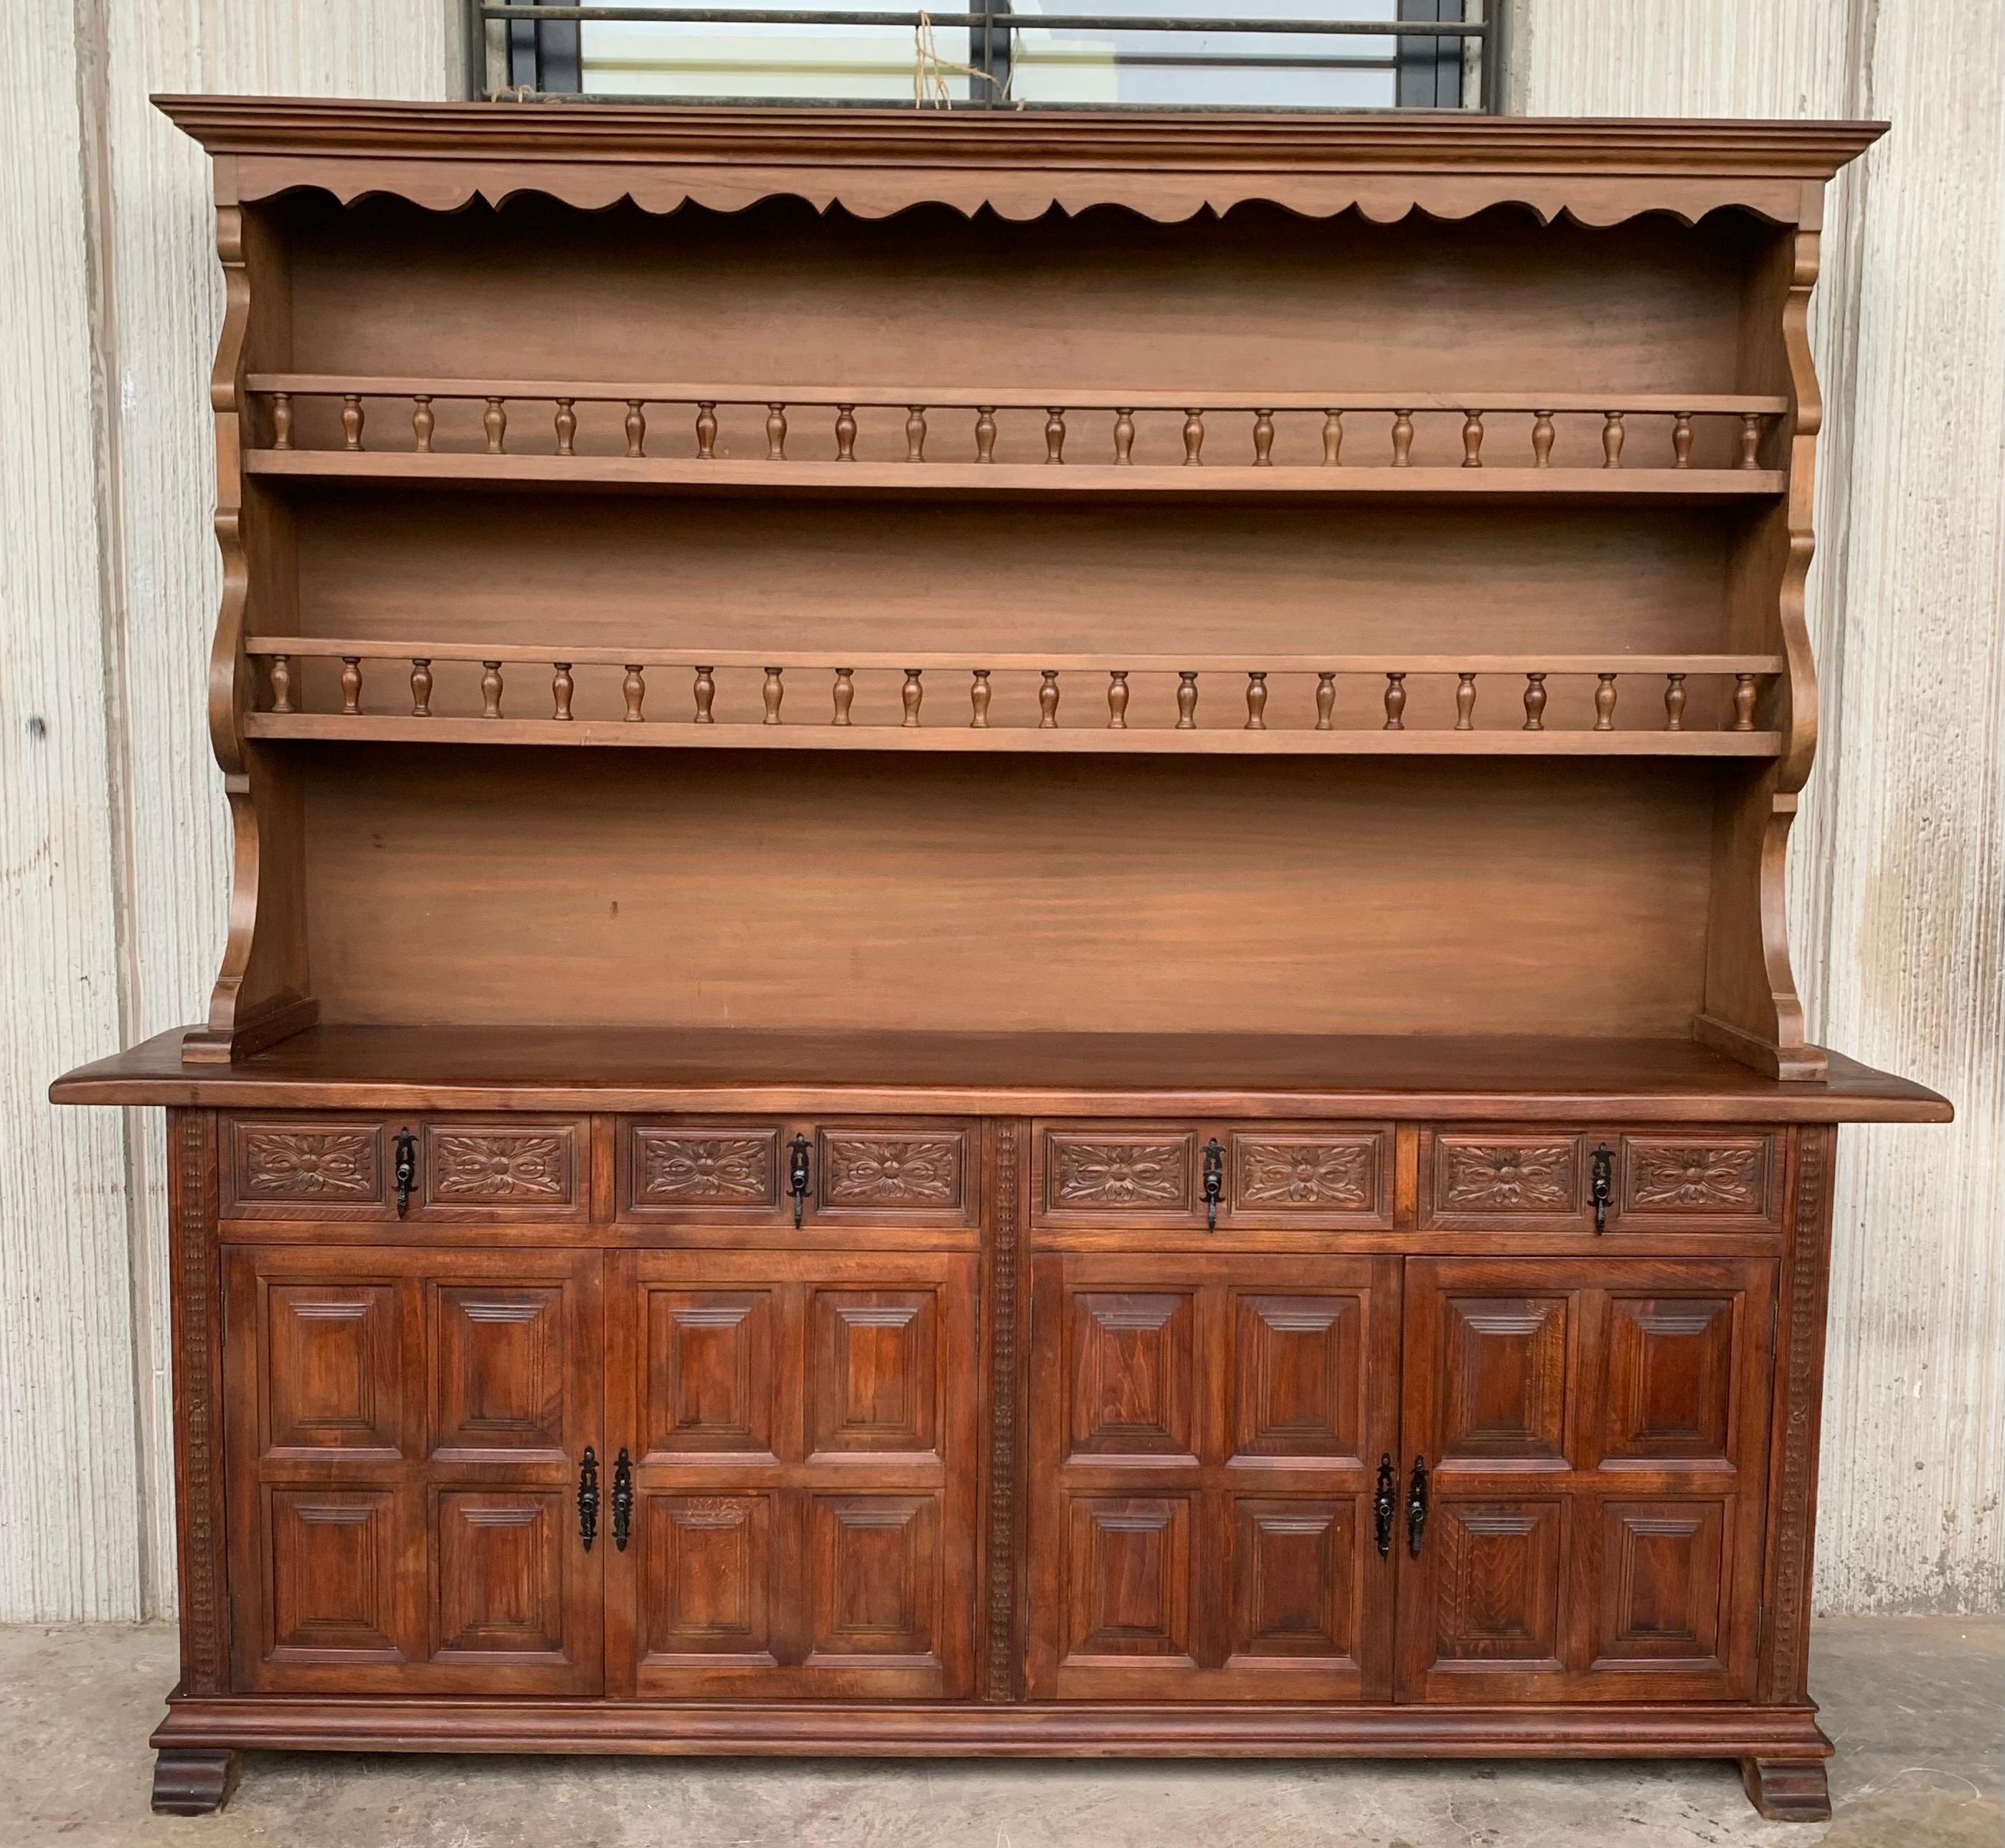 From Northern Spain, constructed of solid pine, the rectangular top with molded edge atop a conforming case housing four drawers over four doors, the doors paneled with solid walnut, raised on a plinth base. The drawers are hand carved and the edges